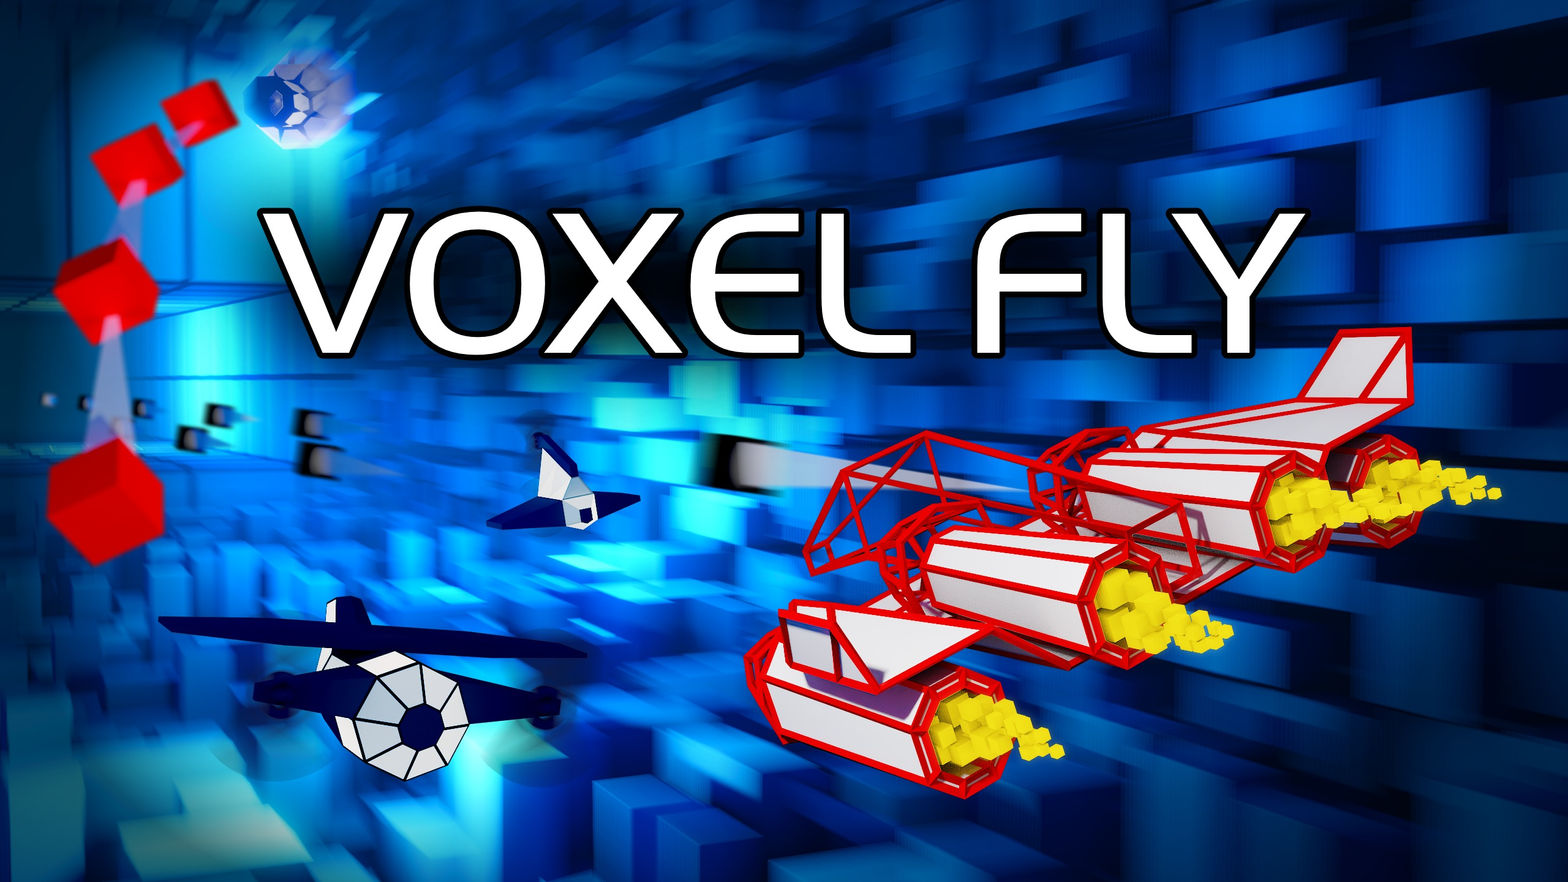 Voxel Fly 